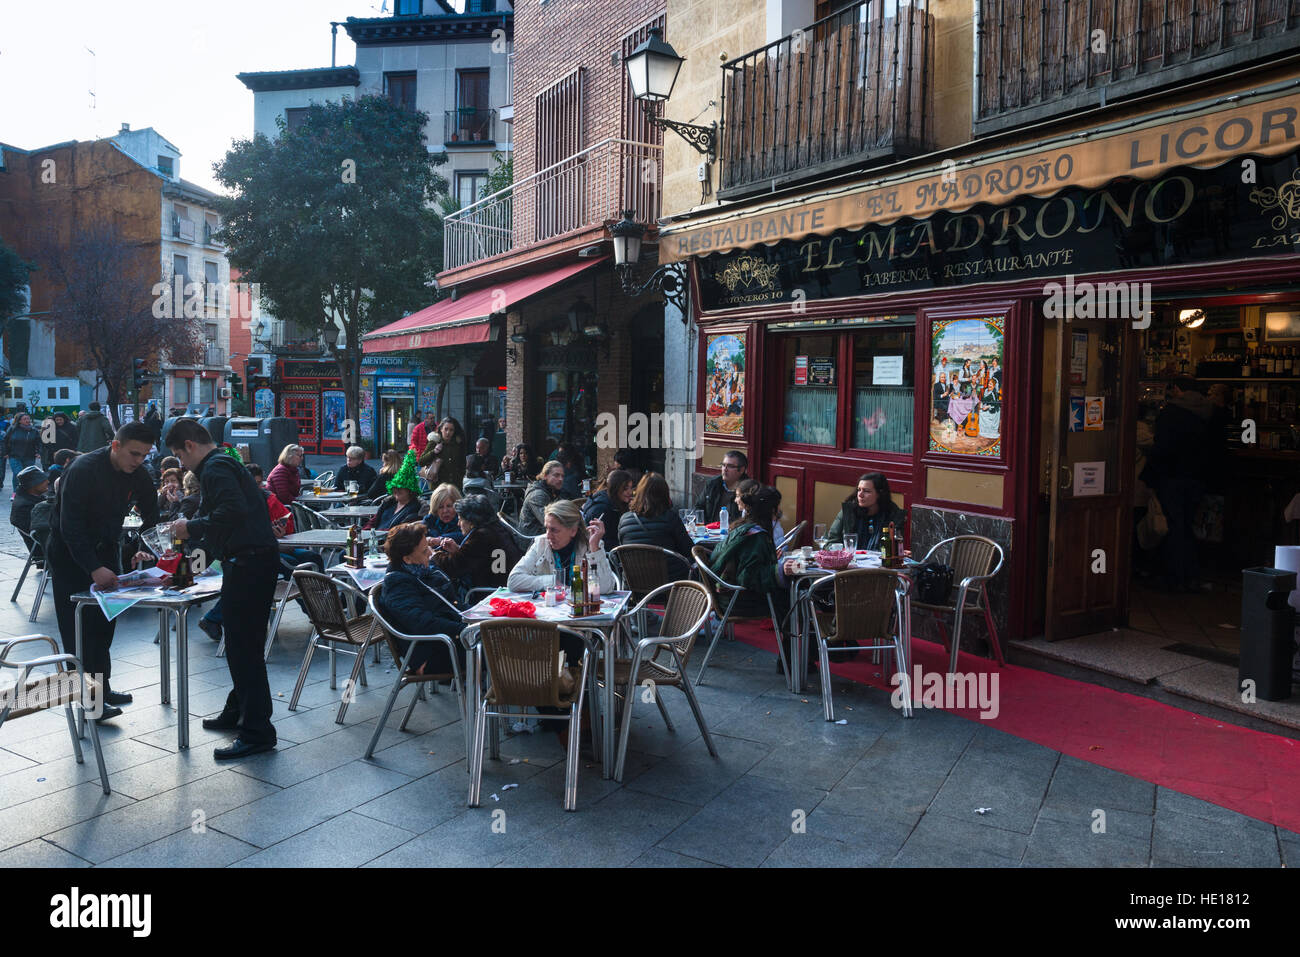 El Madrono Restaurant in Central Madrid, Spain, with outdoor seating. Stock Photo